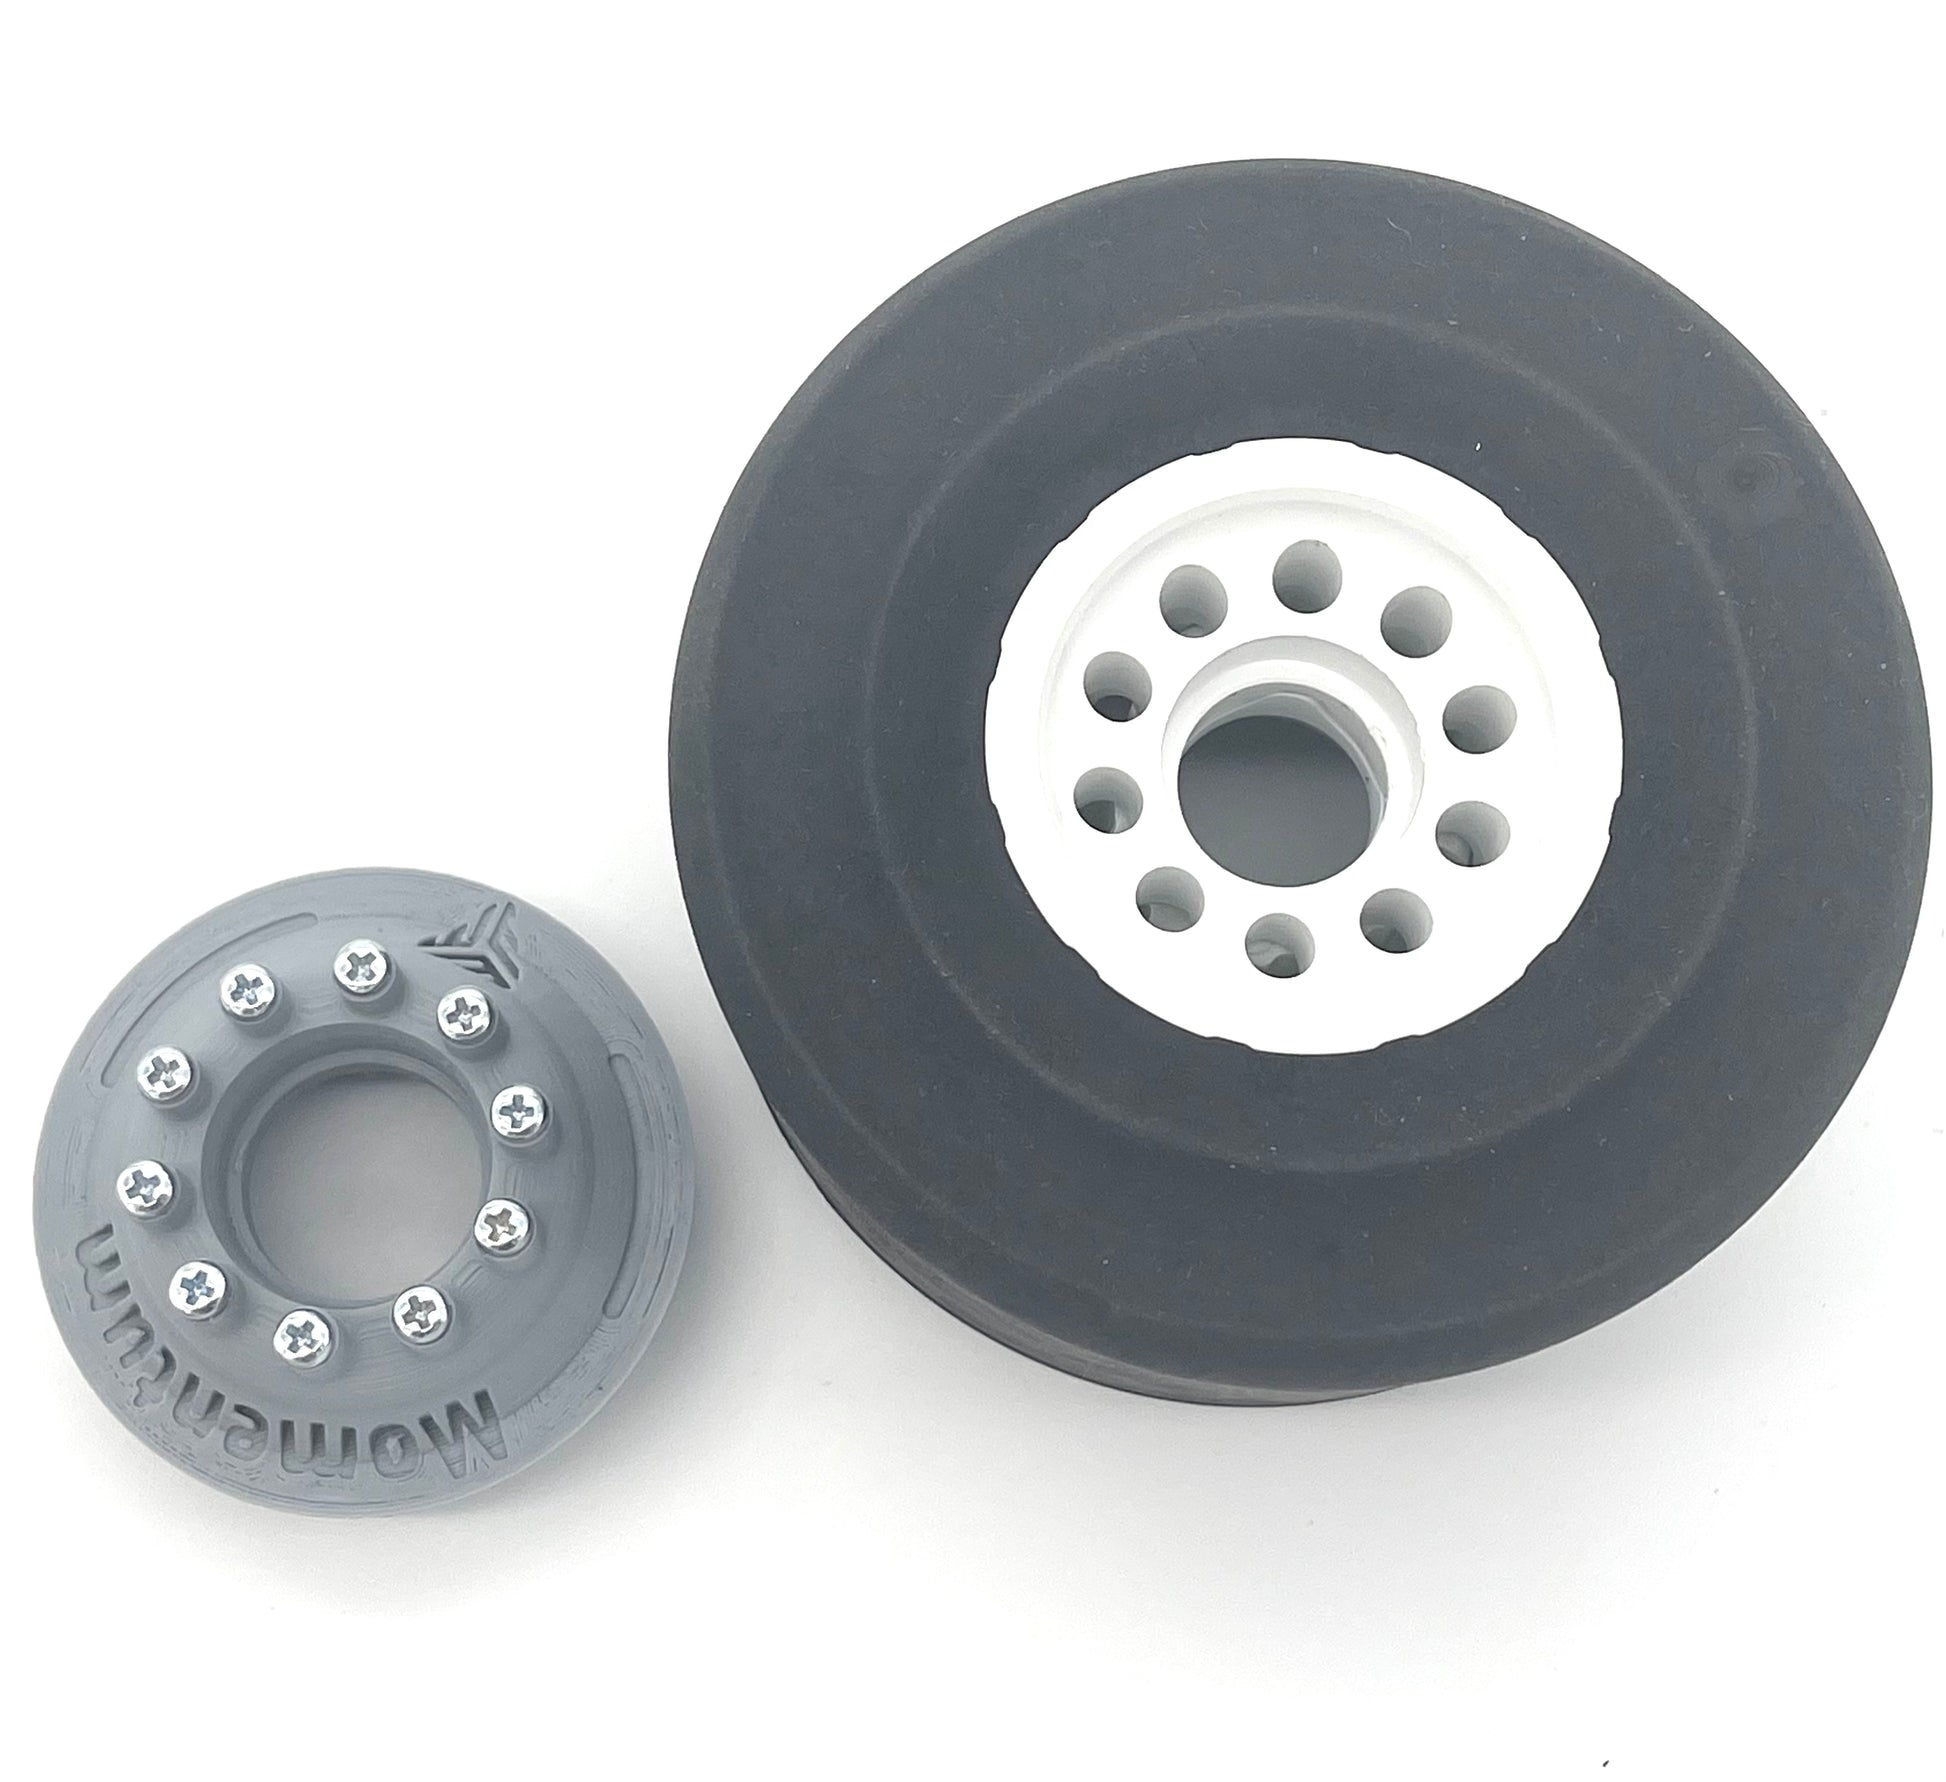 V1 Boosted Board Pulley and wheel